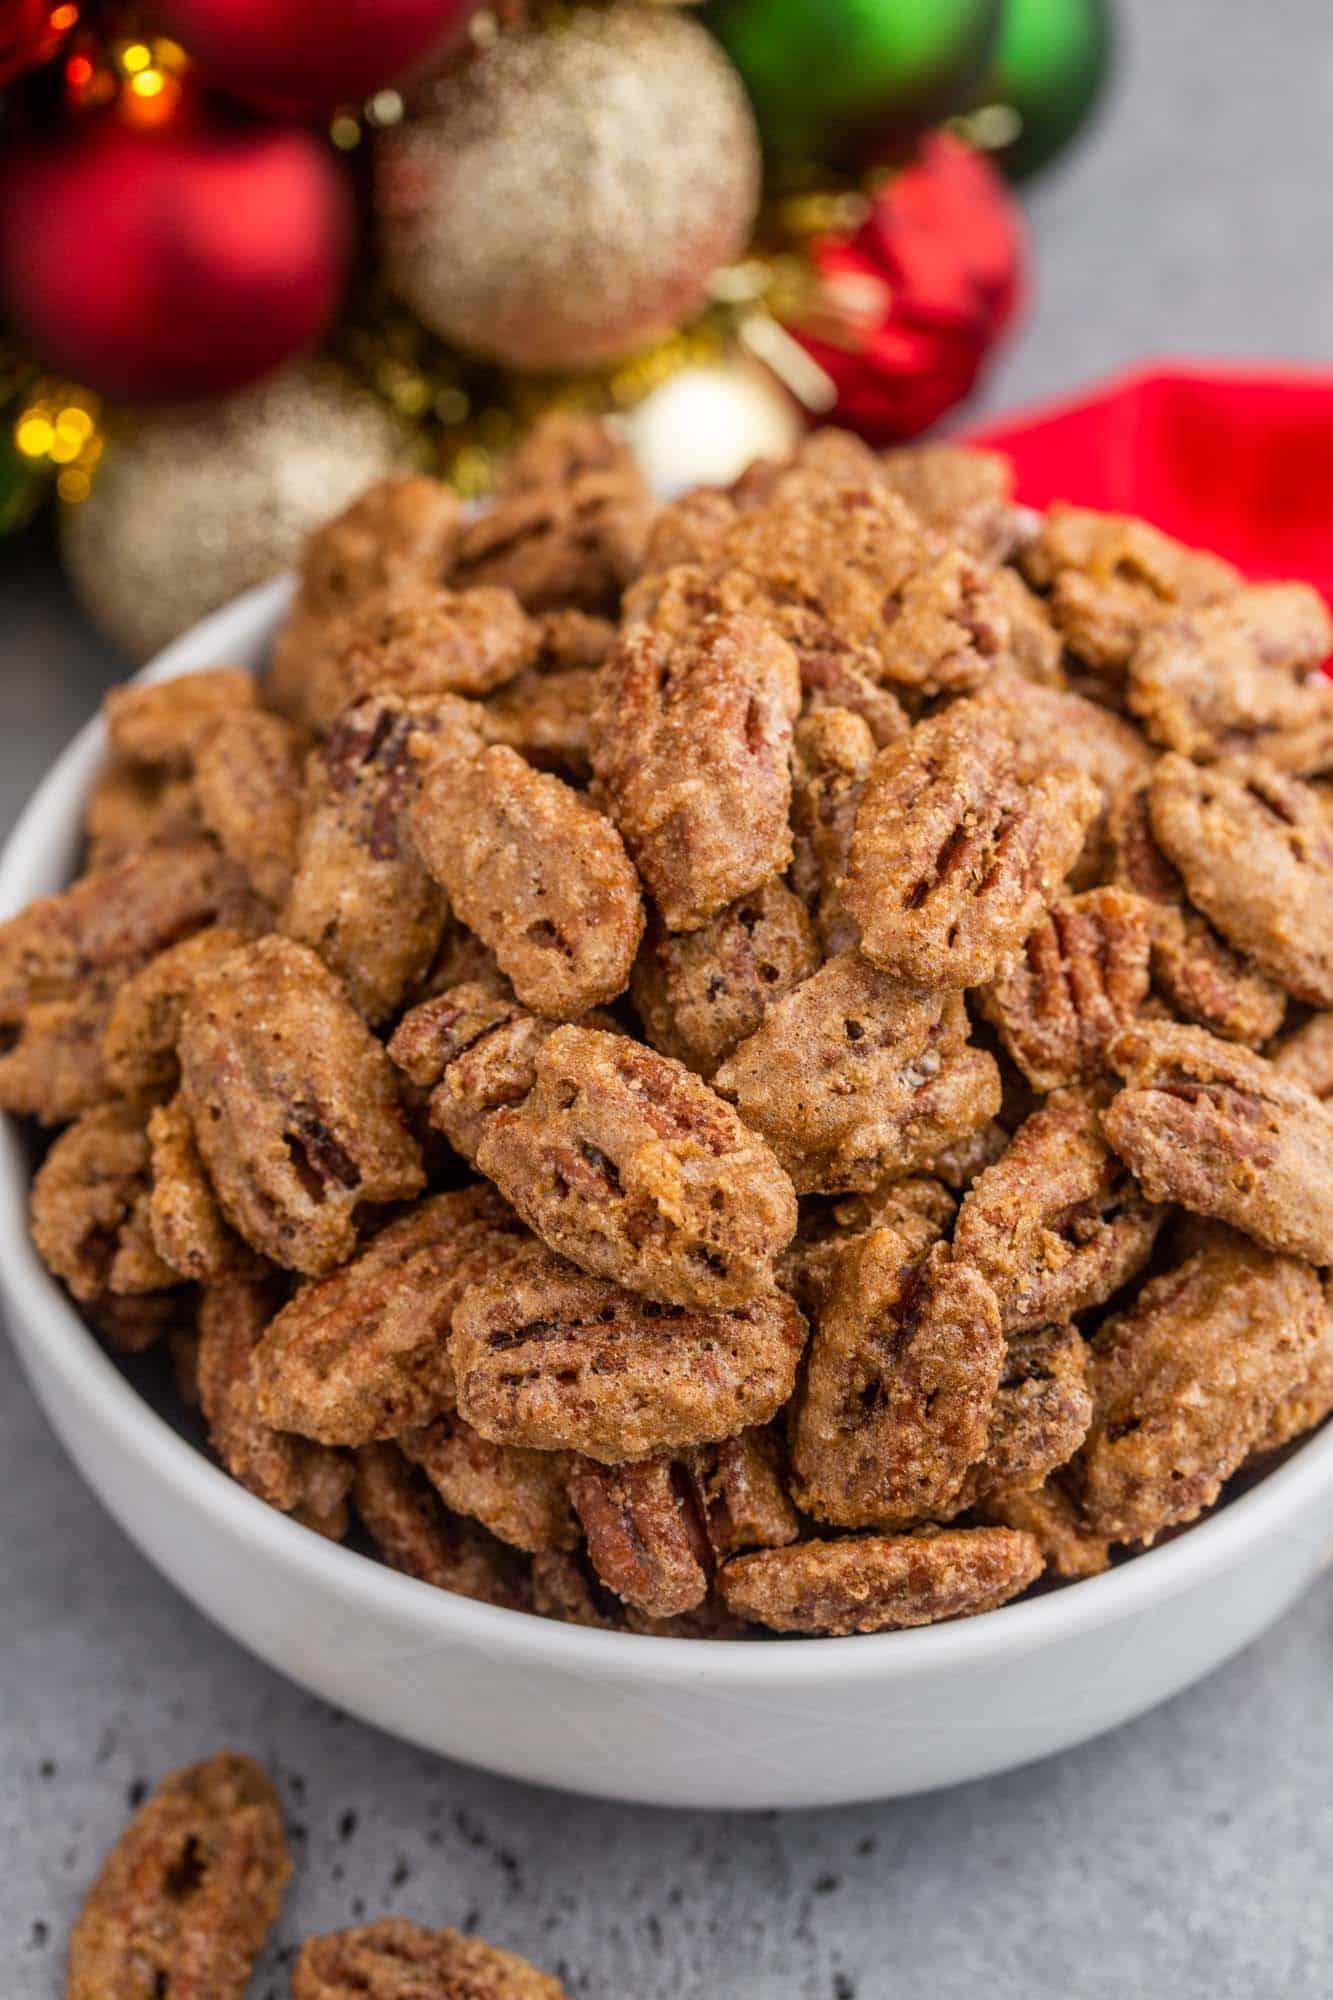 Candied Pecans in a small white bowl, and Christmas decorations in the background.